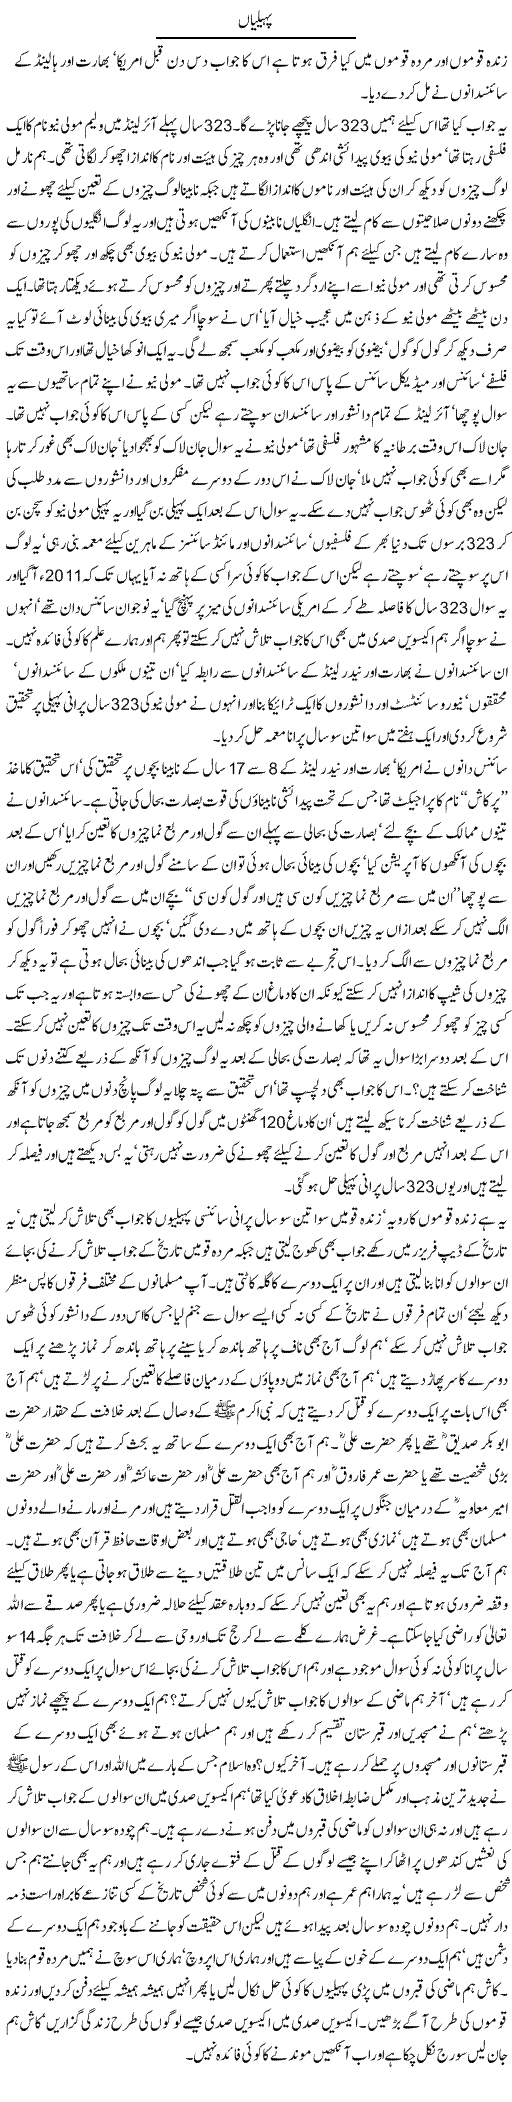 Science and Muslims Express Column Javed Chaudhry 17 April 2011